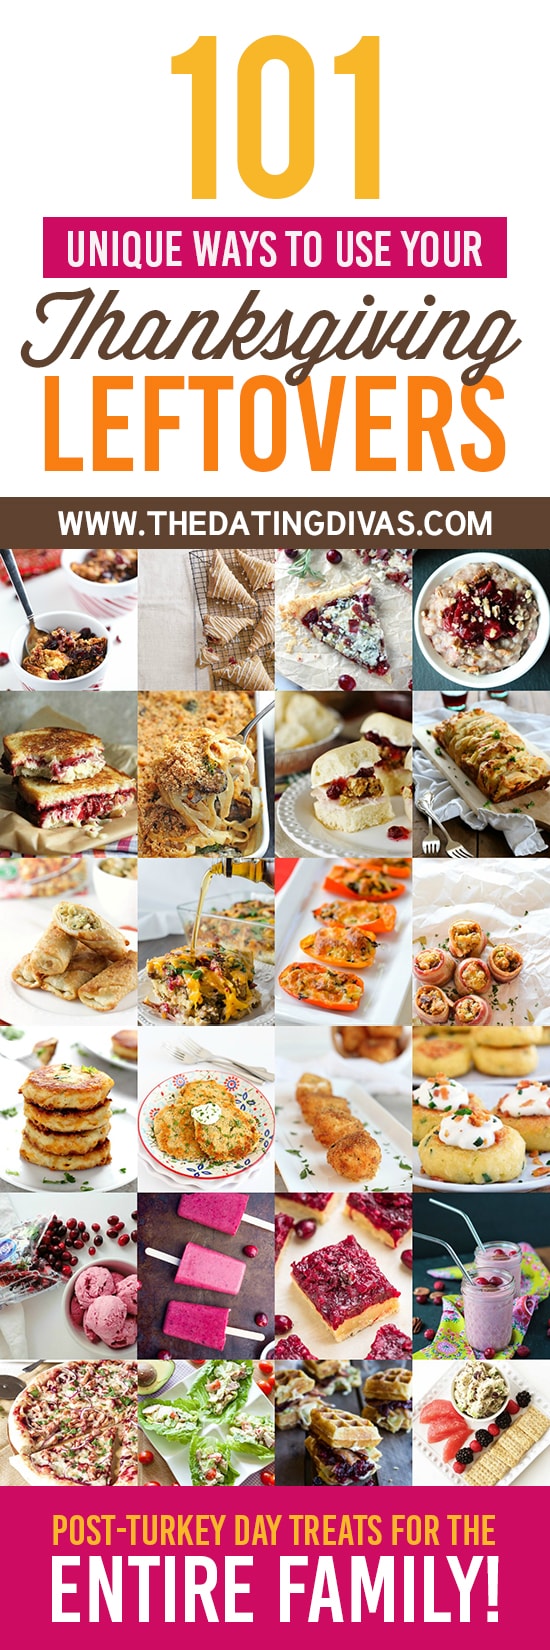 101 Ways to Use Your Thanksgiving Leftovers